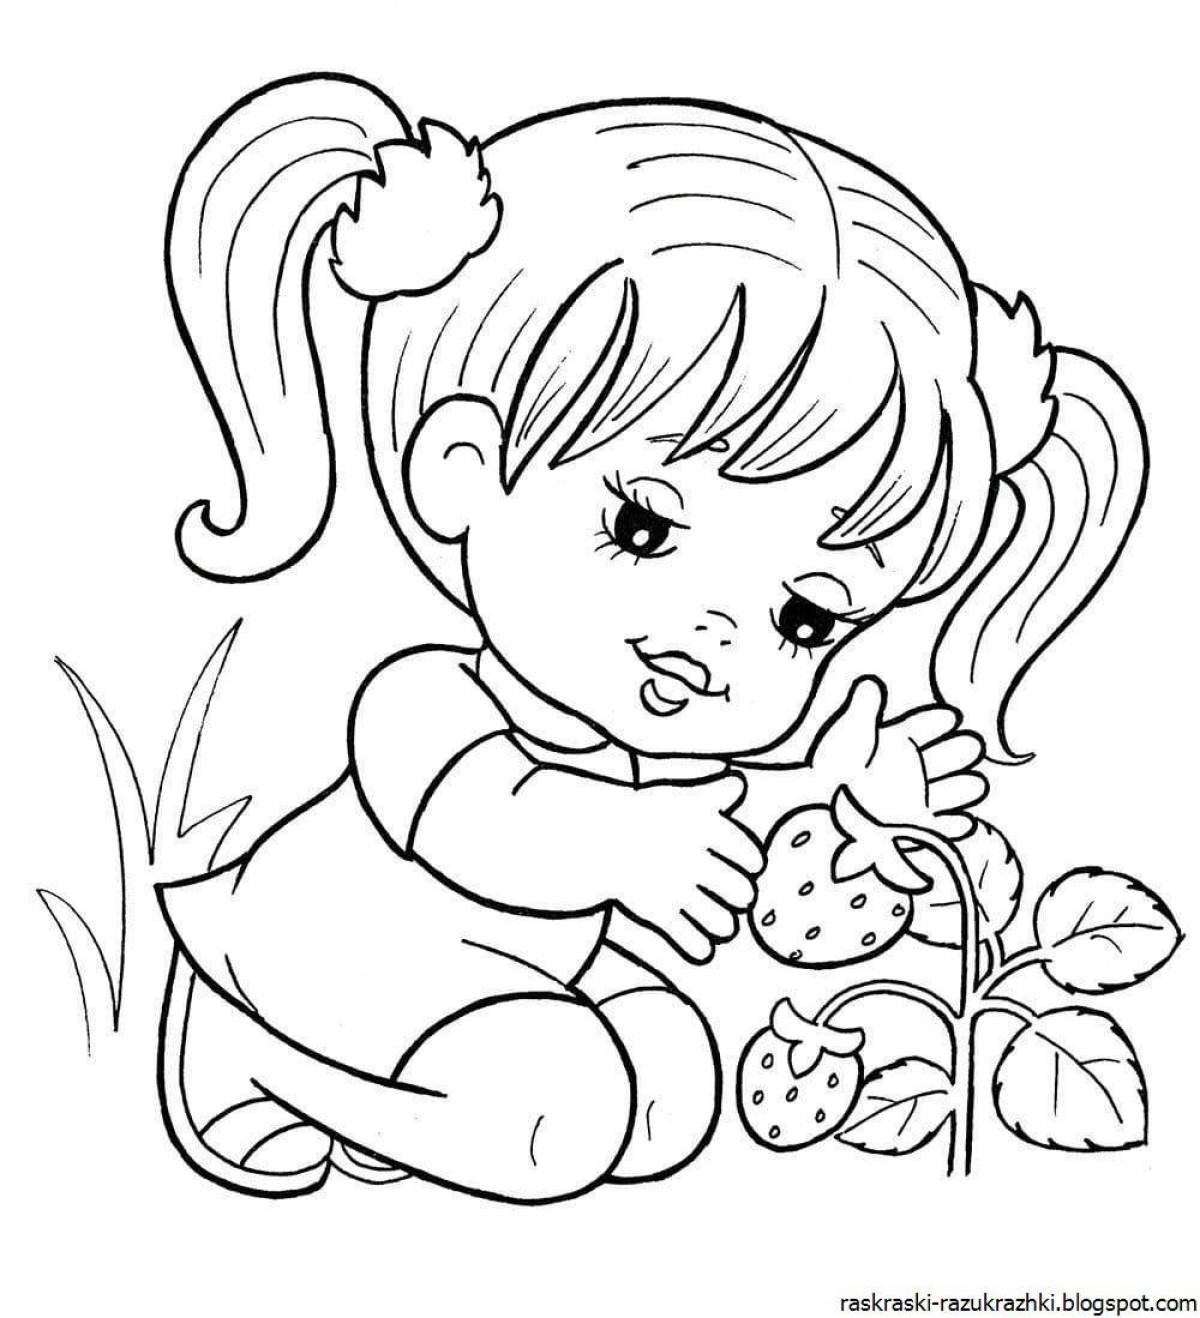 Fun coloring book for girls 3-4 years old